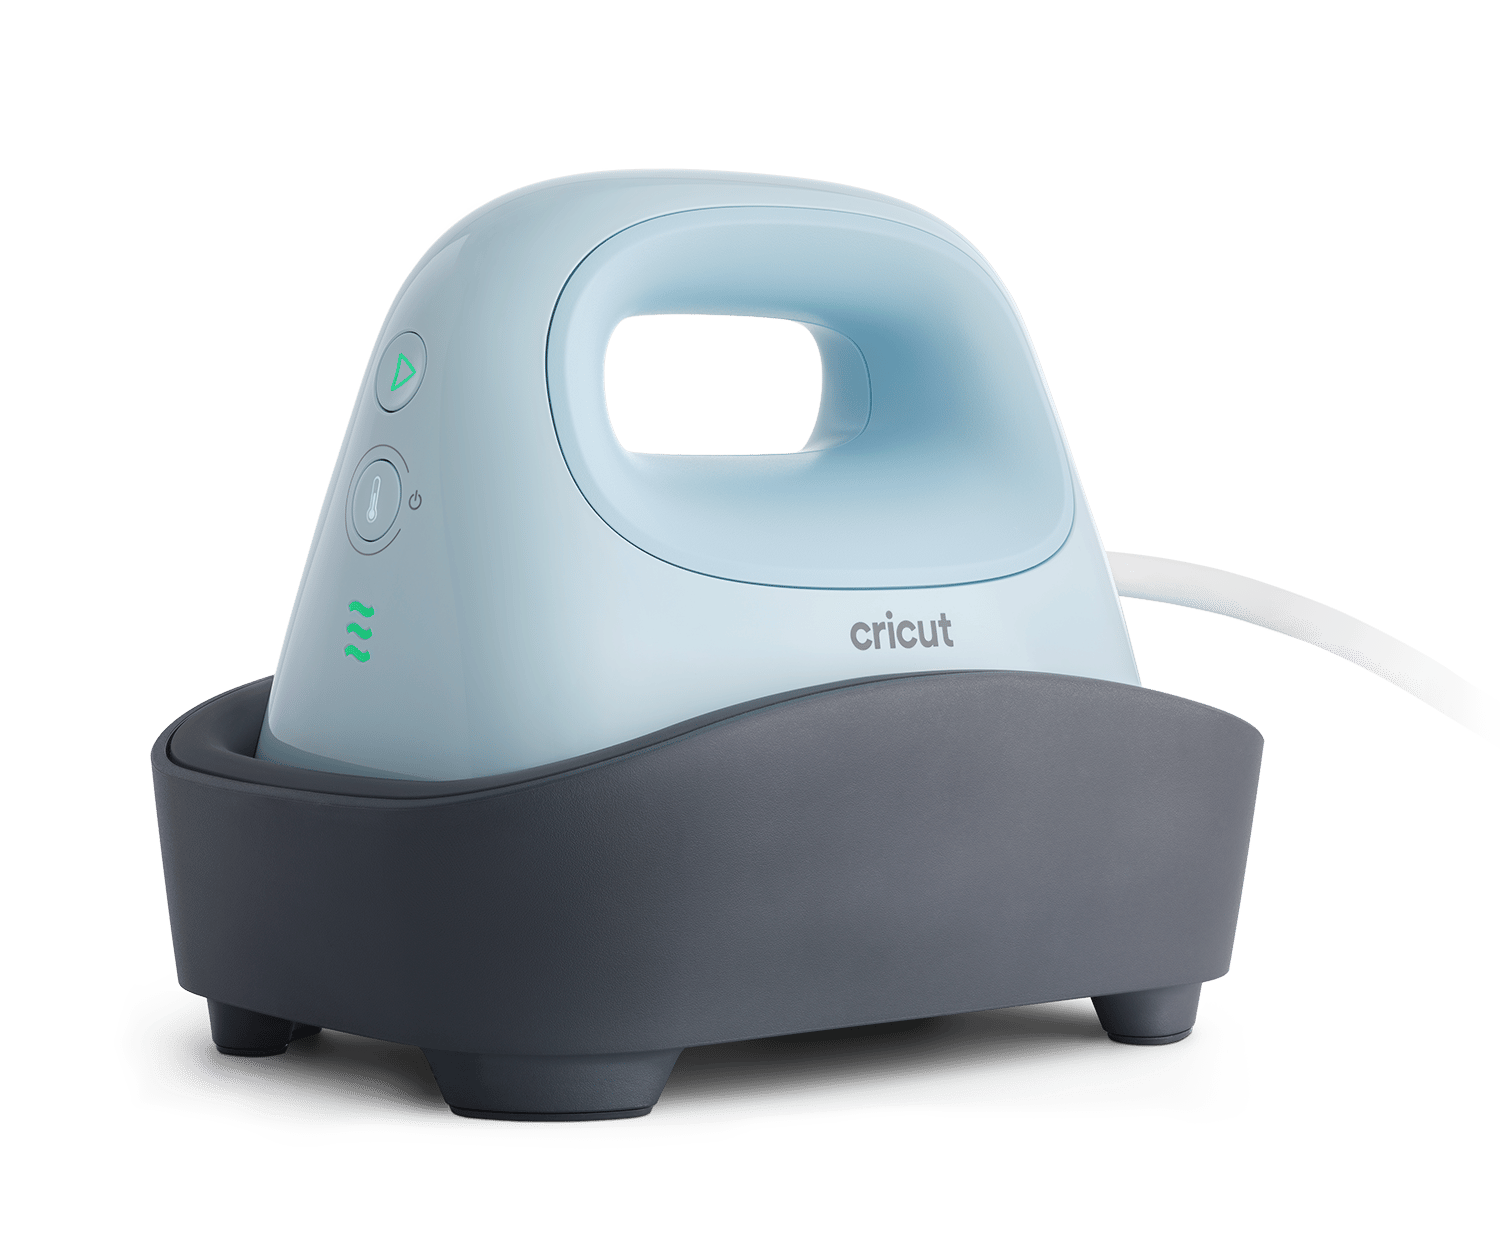 What are the Advantages of the Cricut Hat Press?